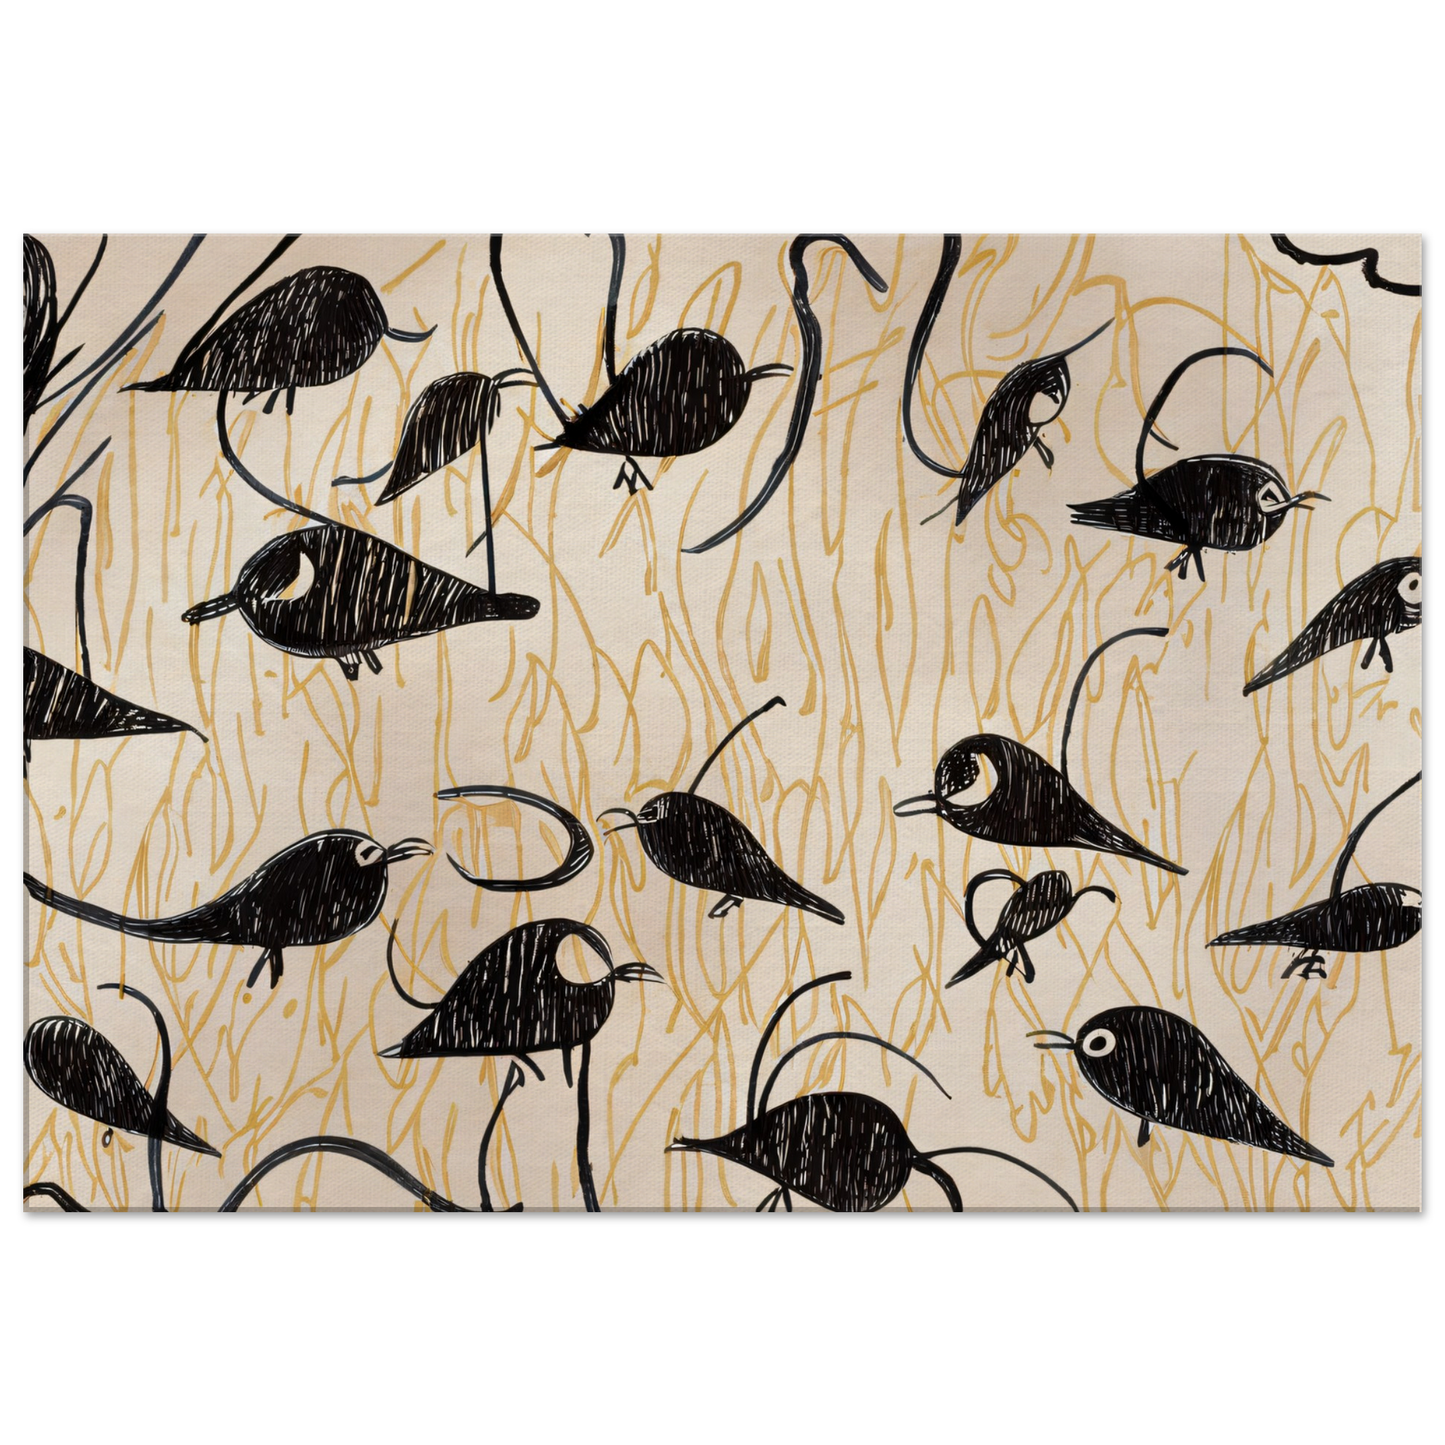 Canvas with birds #2 line pattern by Posterify Design - Posterify